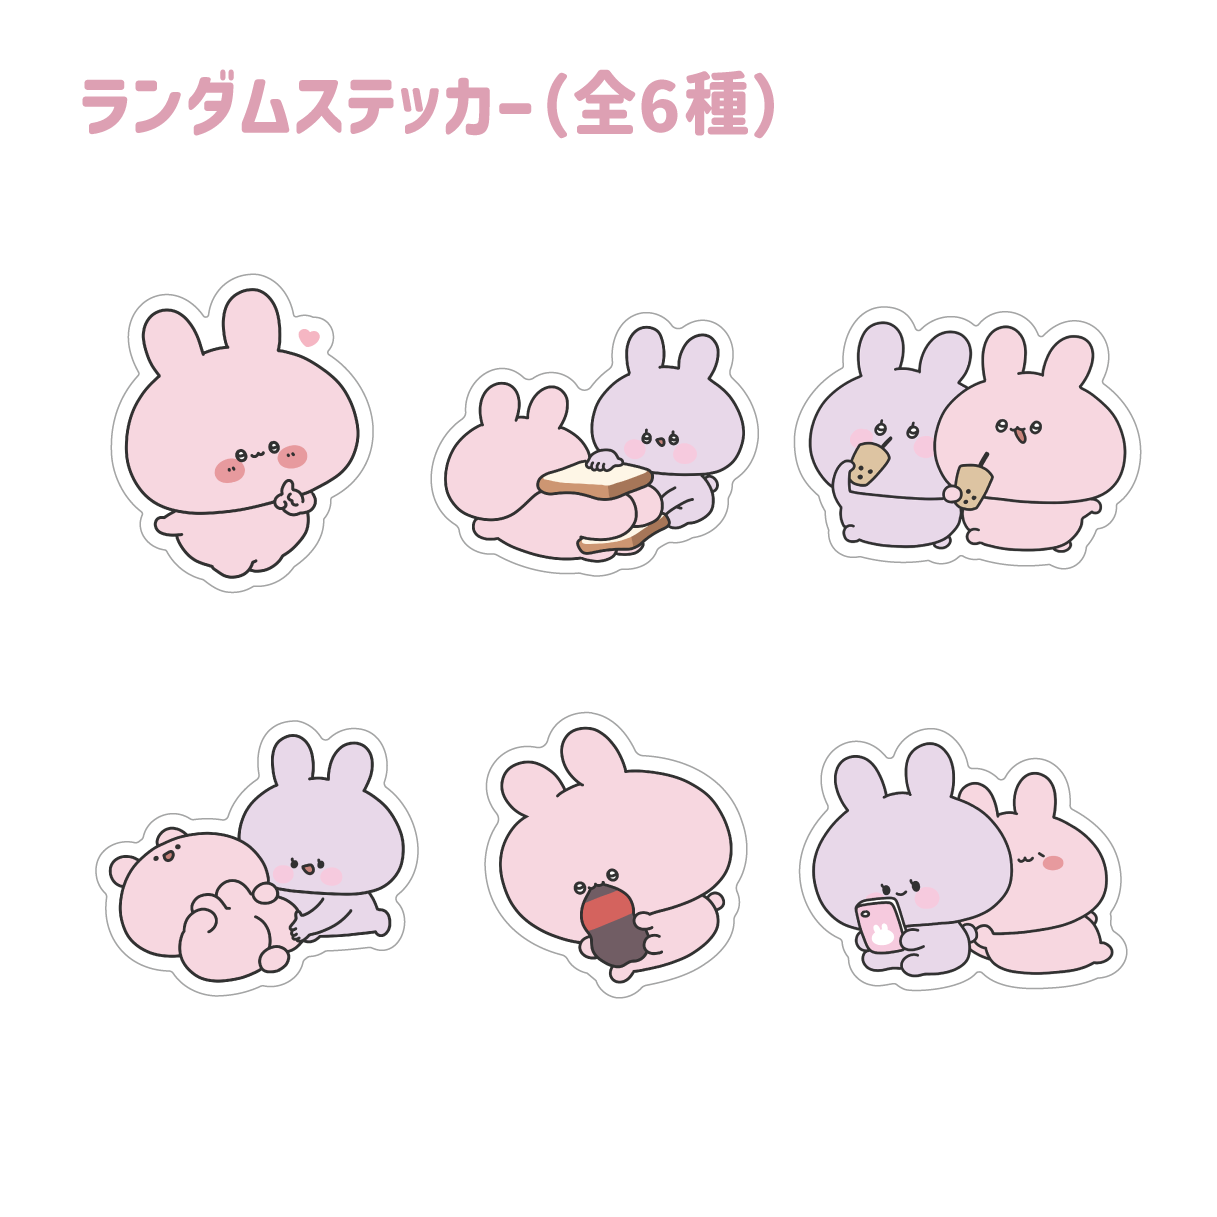 [Asamimi-chan] Random stickers (6 types in total) (Asamimi-chan popular scene Yoseatsume series) [Shipped in mid-February]